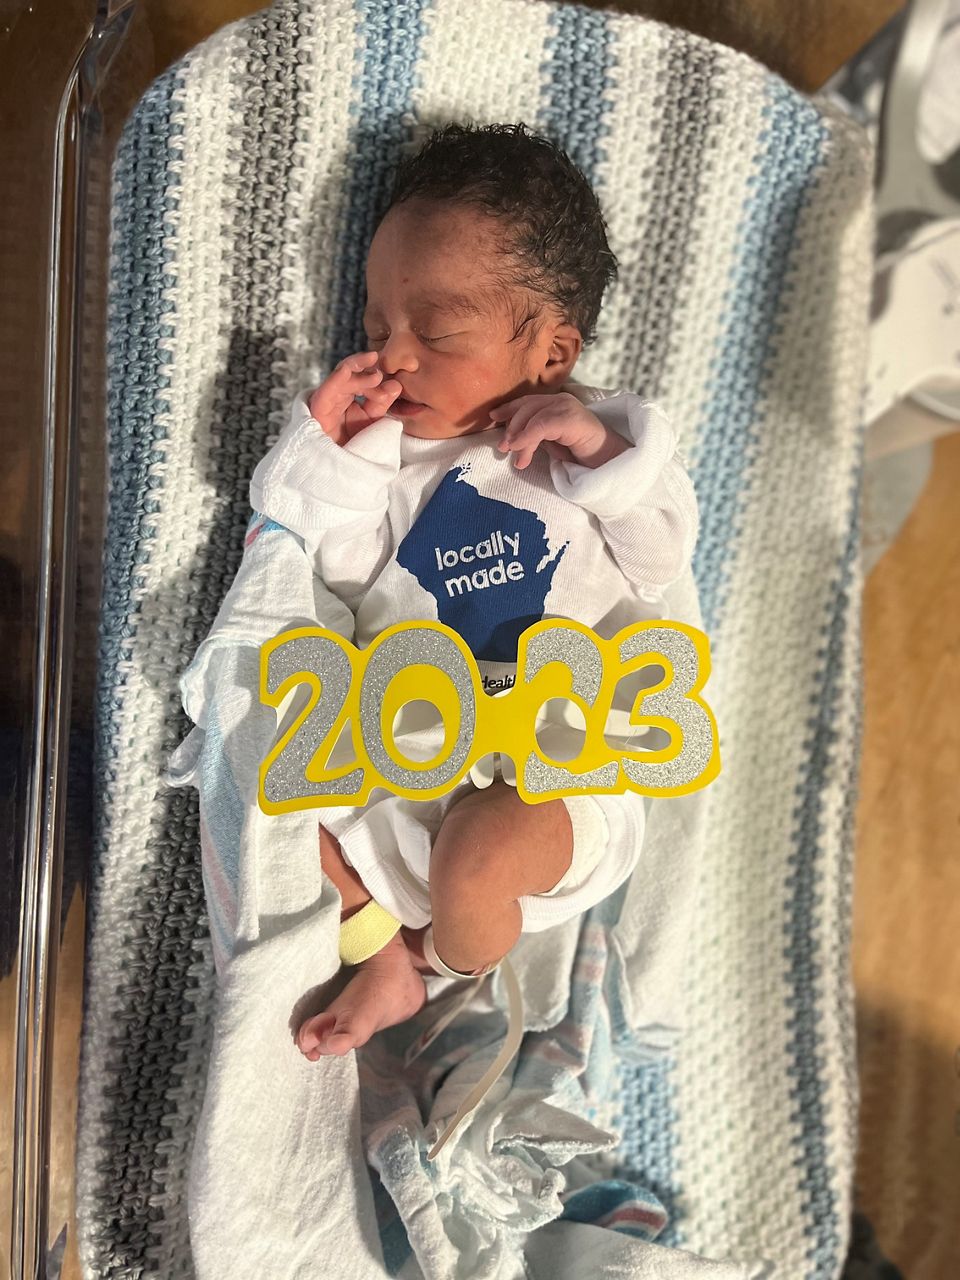 Photos: New Year's babies! Meet the first babies born in 2021, WJHL